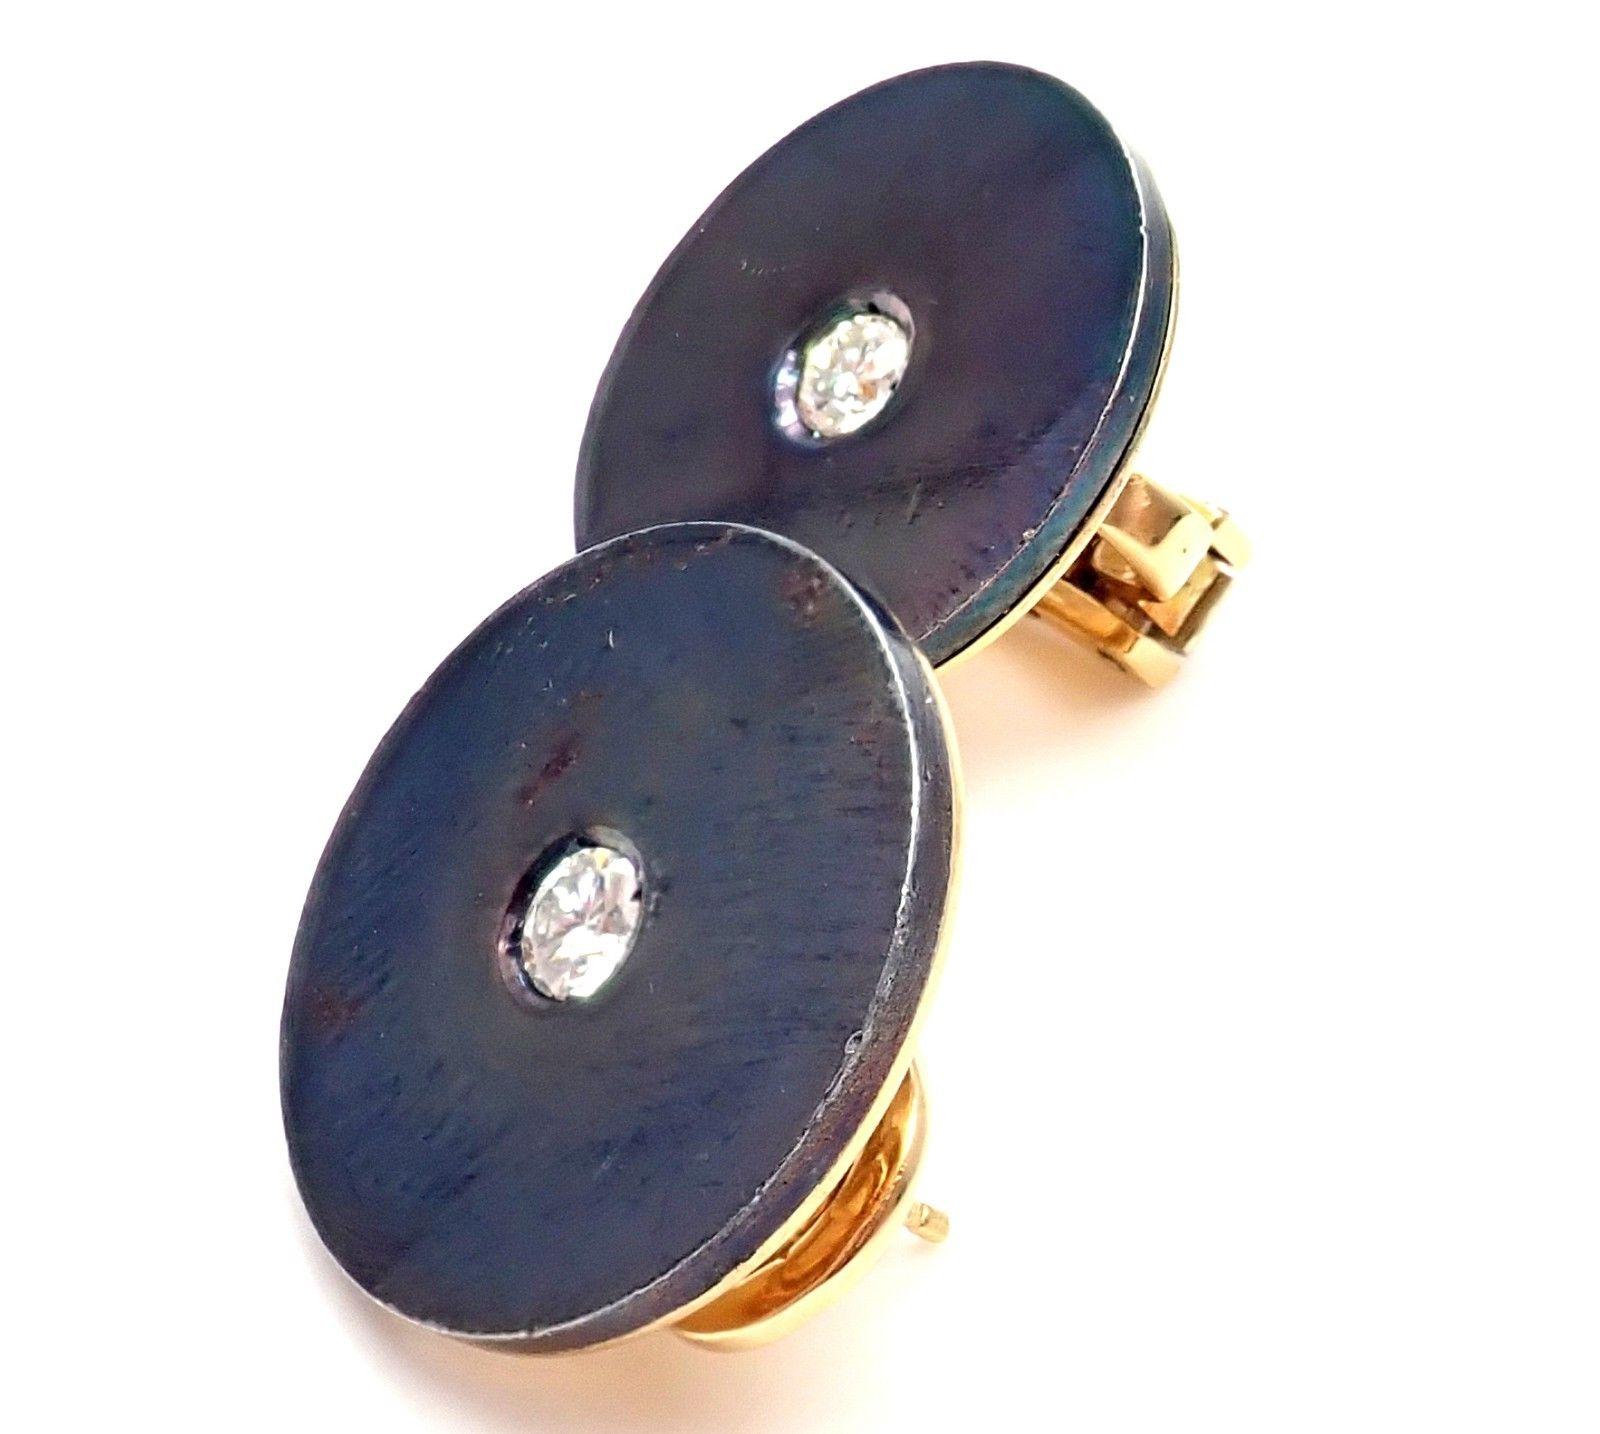 18k Yellow Gold Diamond Hematite Earrings by Bulgari. 
With 2 round brilliant cut diamonds VS1 clarity, G color total weight approx. .40ct
These earrings are made for pierced ears.
Details: 
Measurements: 19mm
Weight: 14.1 grams
Stamped Hallmarks: